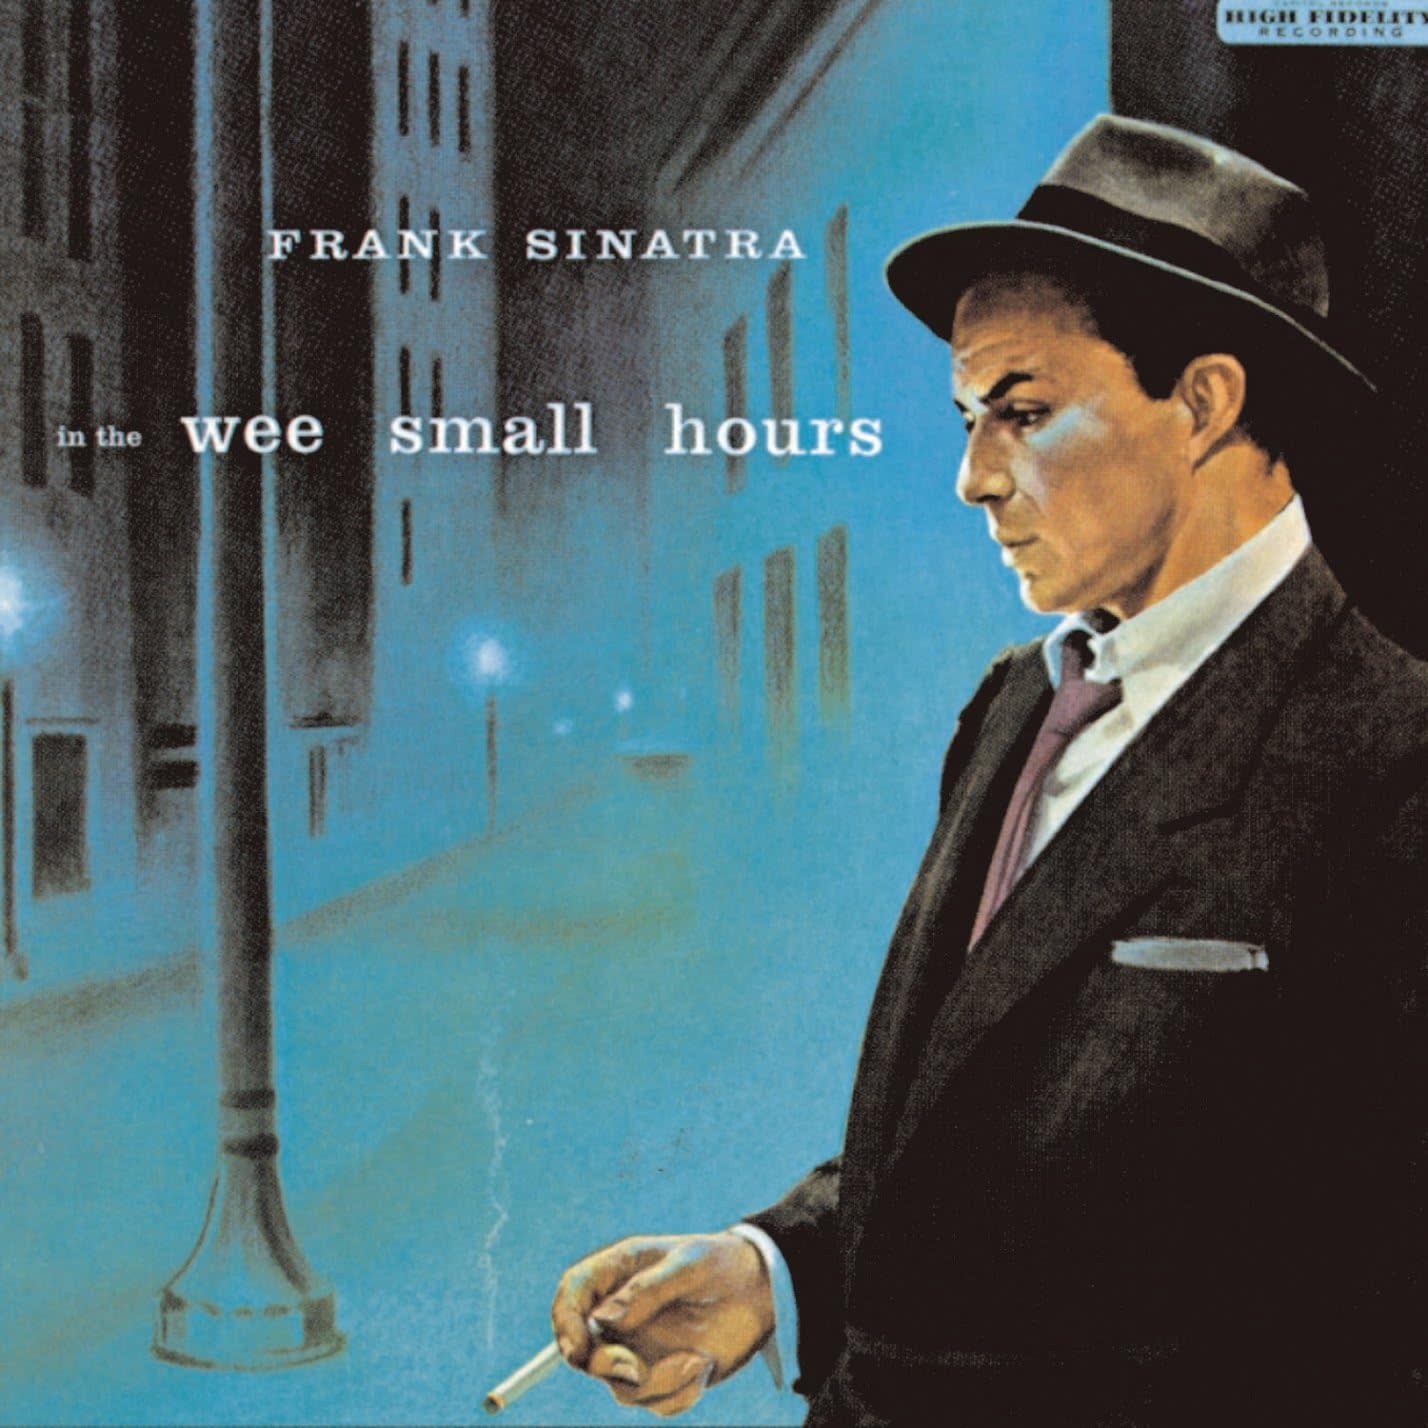 Frank Sinatra – In The Wee Small Hours